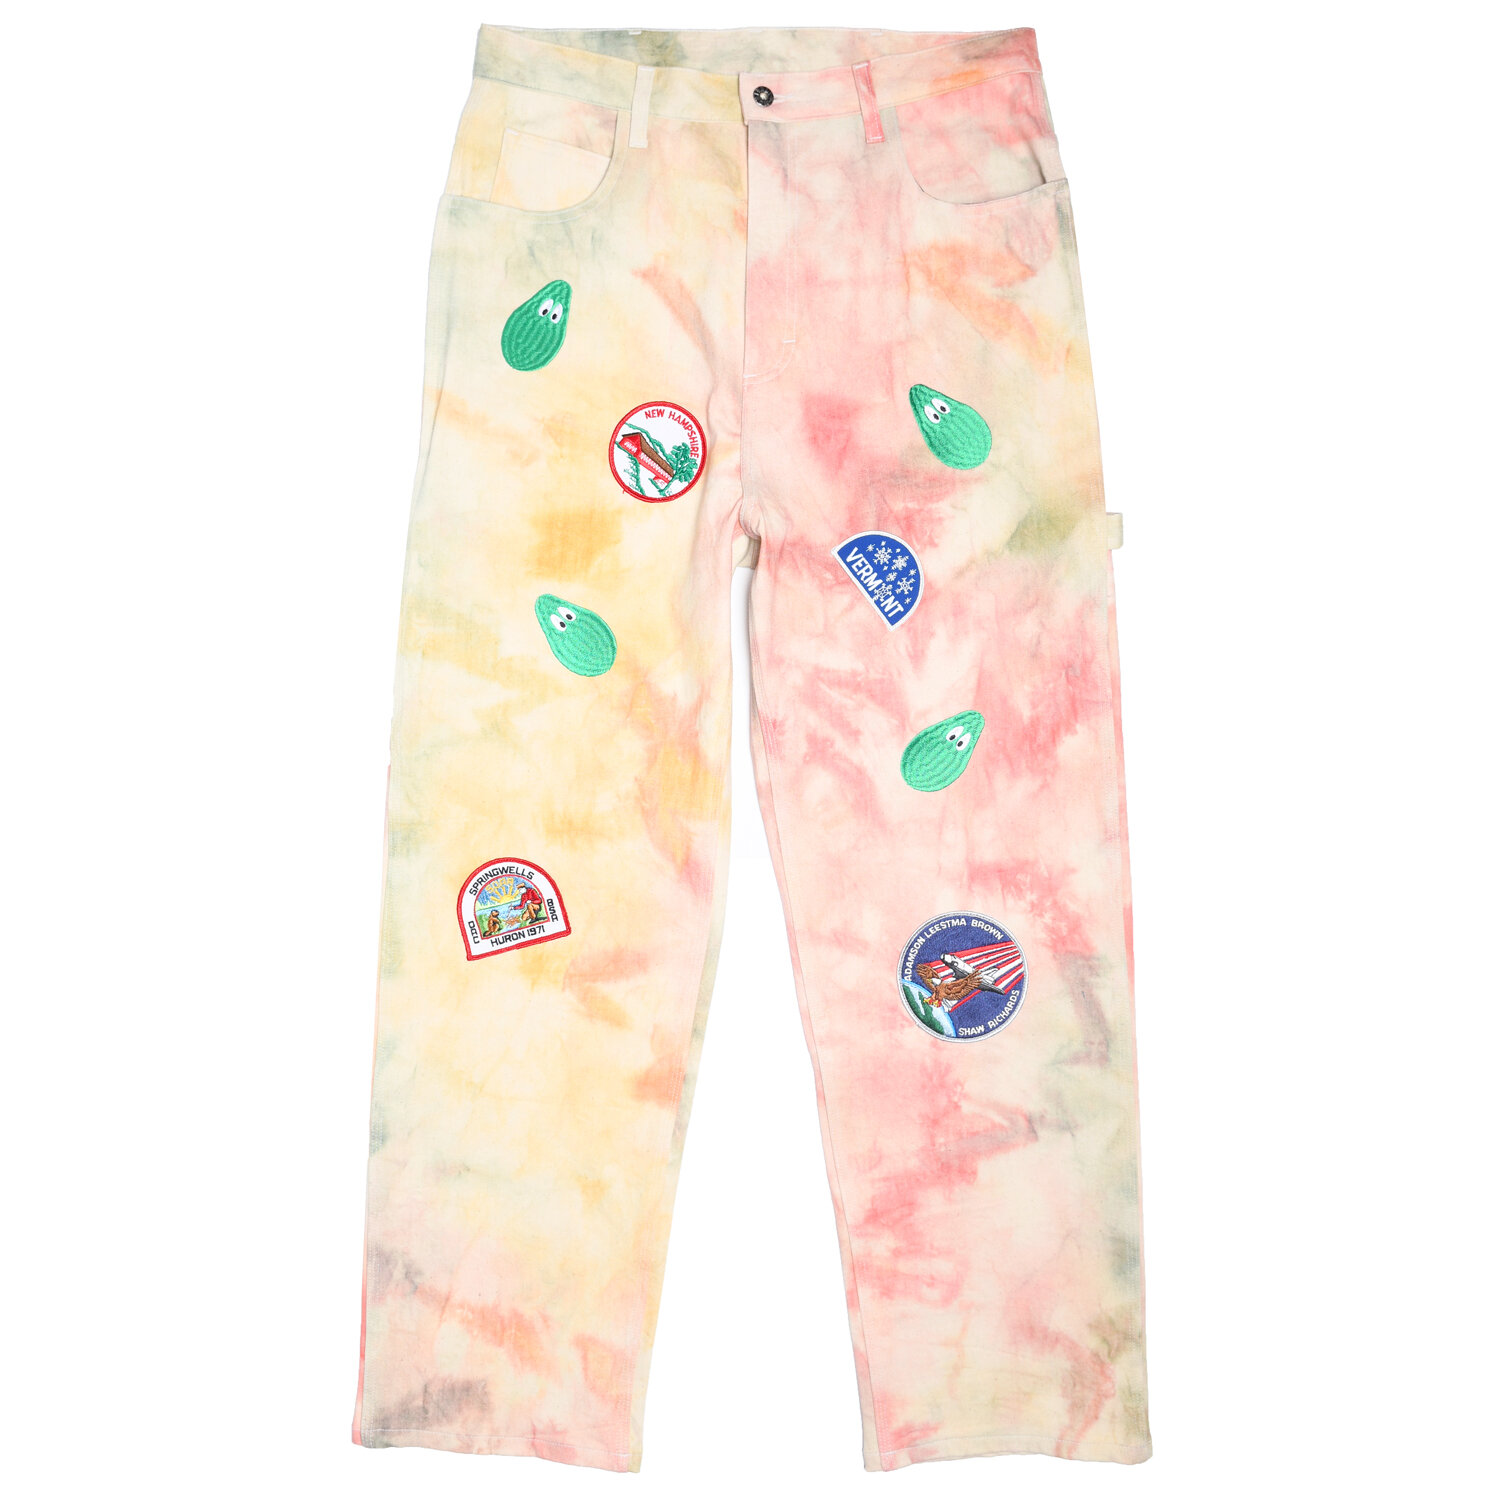 Drop Crotch Painter Pants w/ Avocado Embroidery + Patches